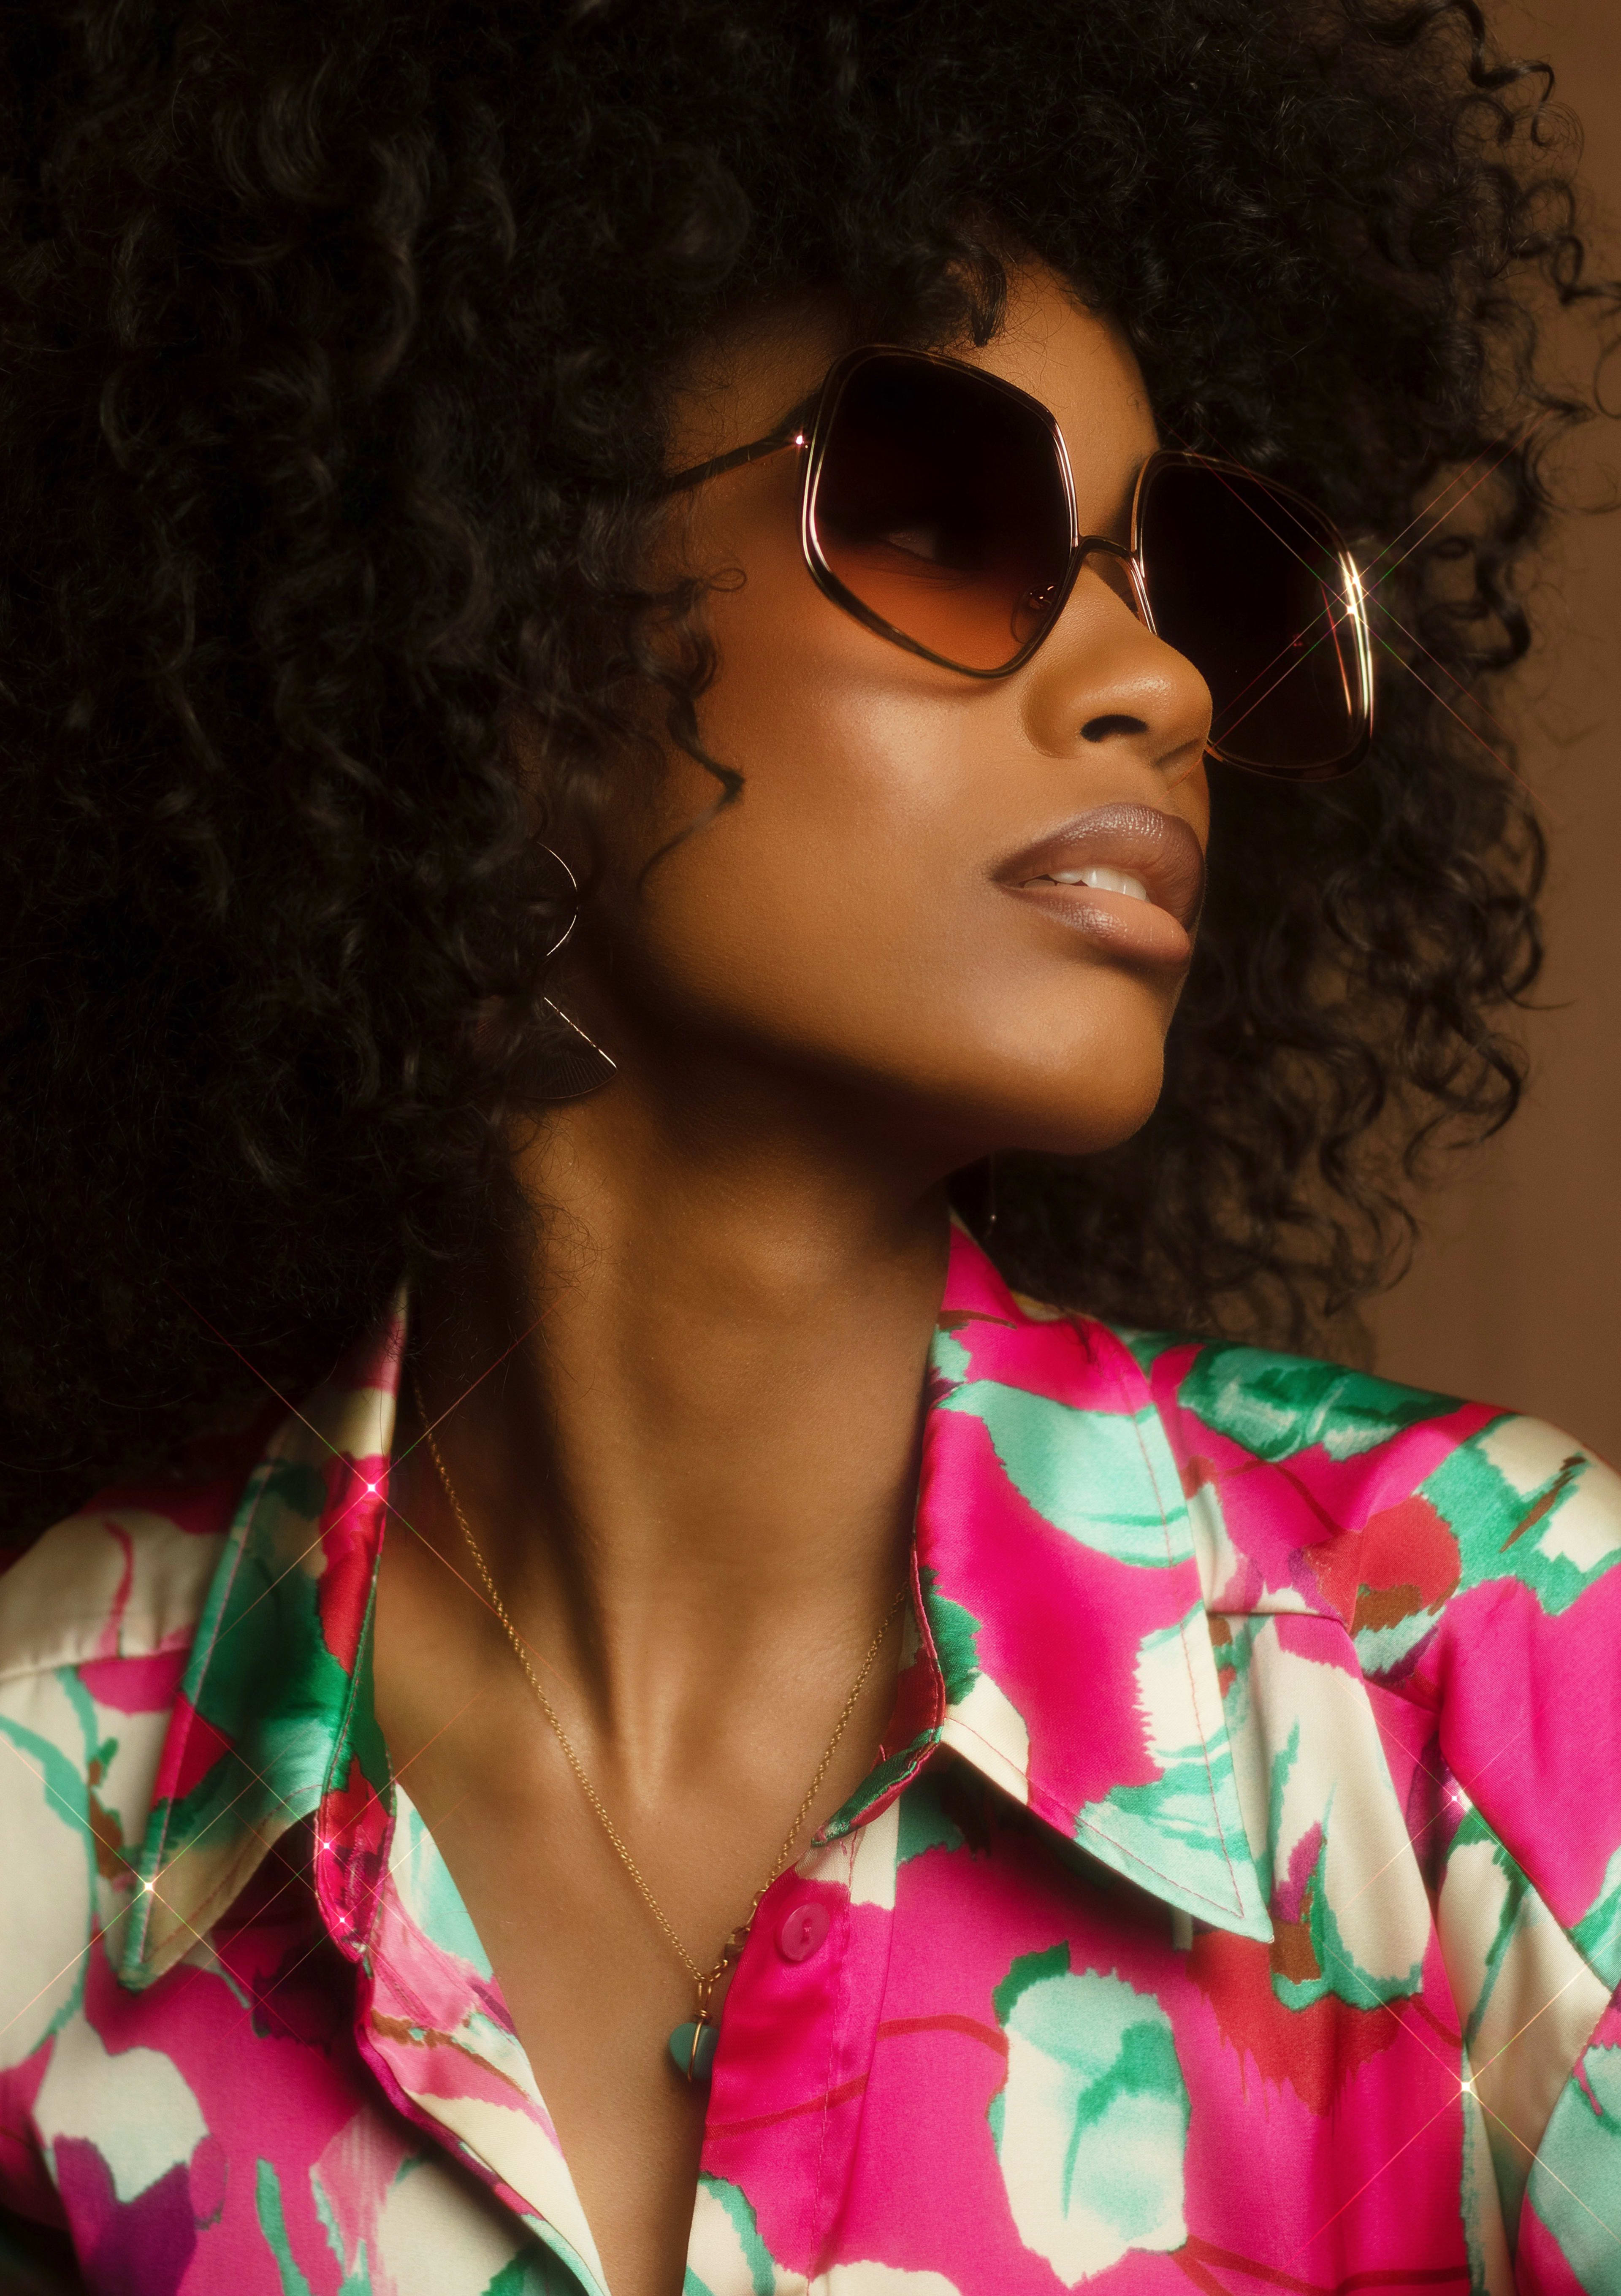 A photoshoot of a person in a pink and green collared shirt wearing sunglasses.